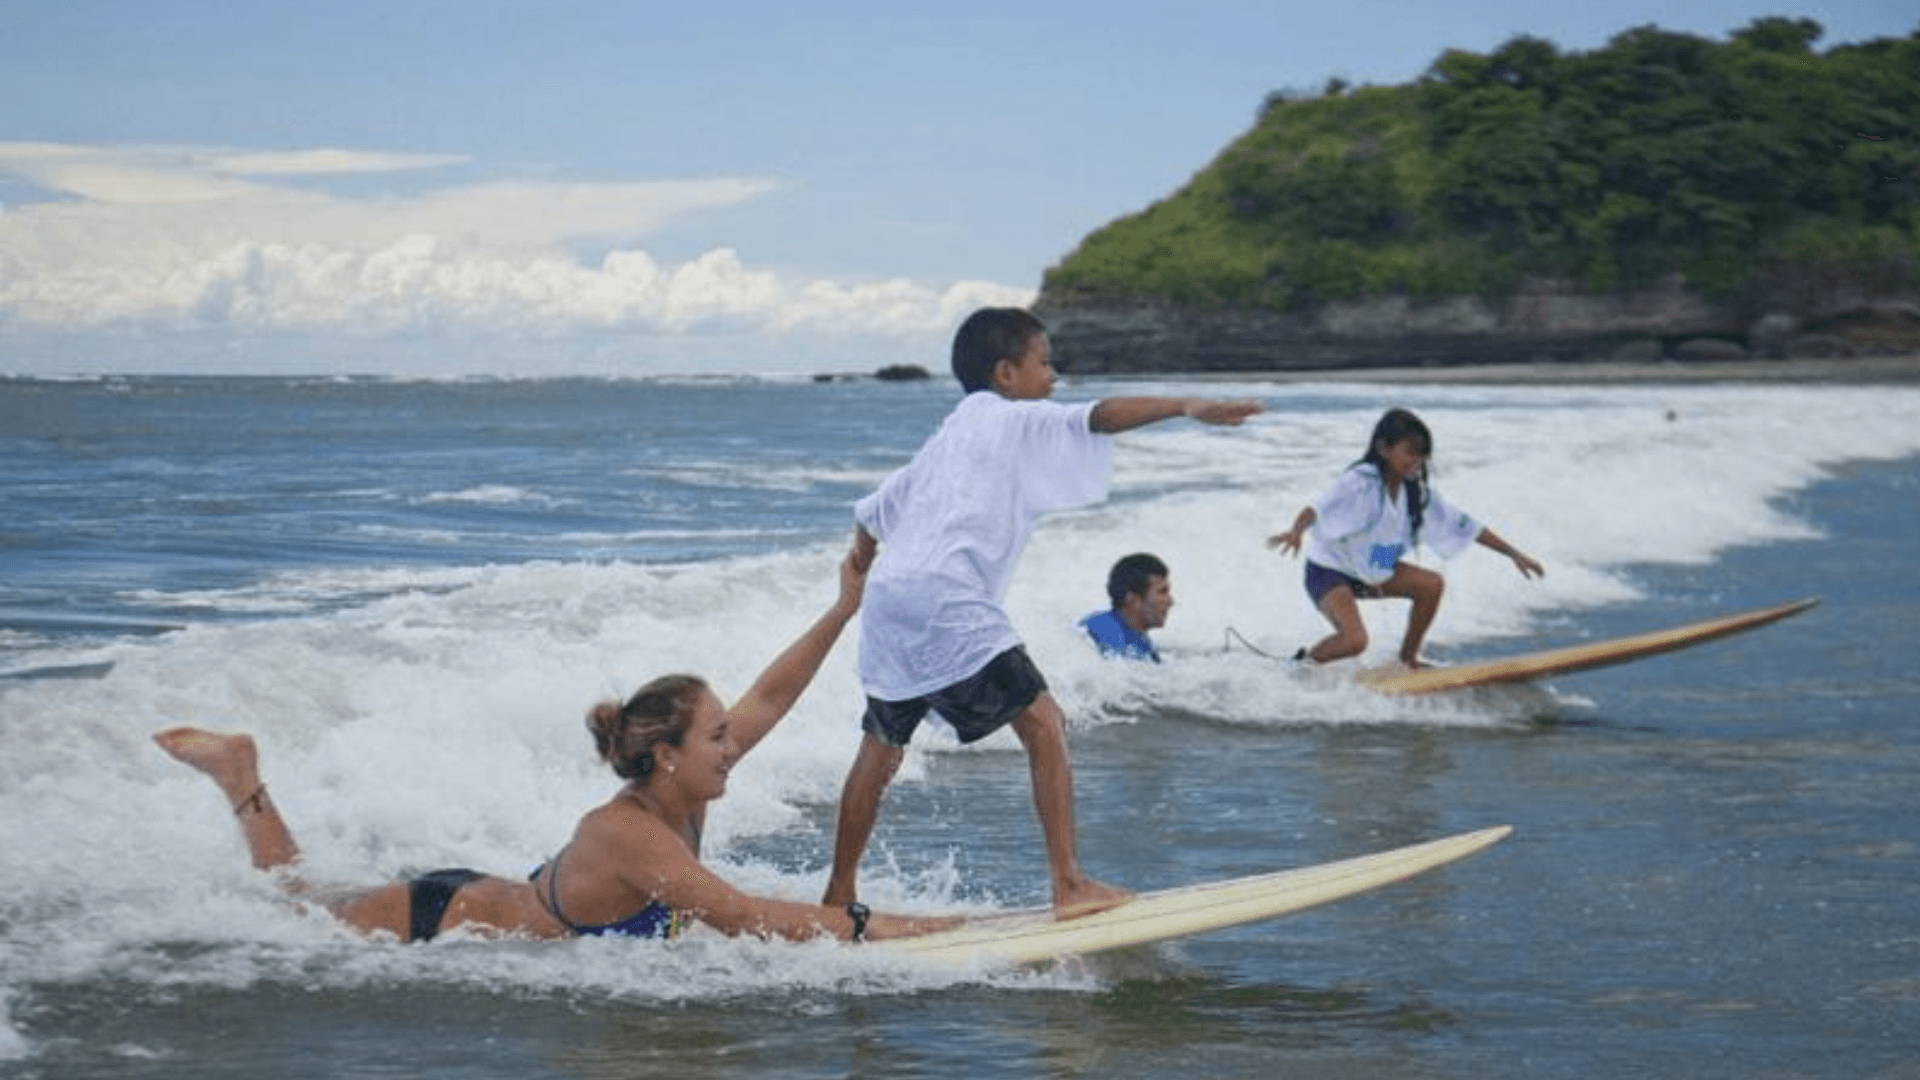 Inspire A Kid To Surf, Change A Life